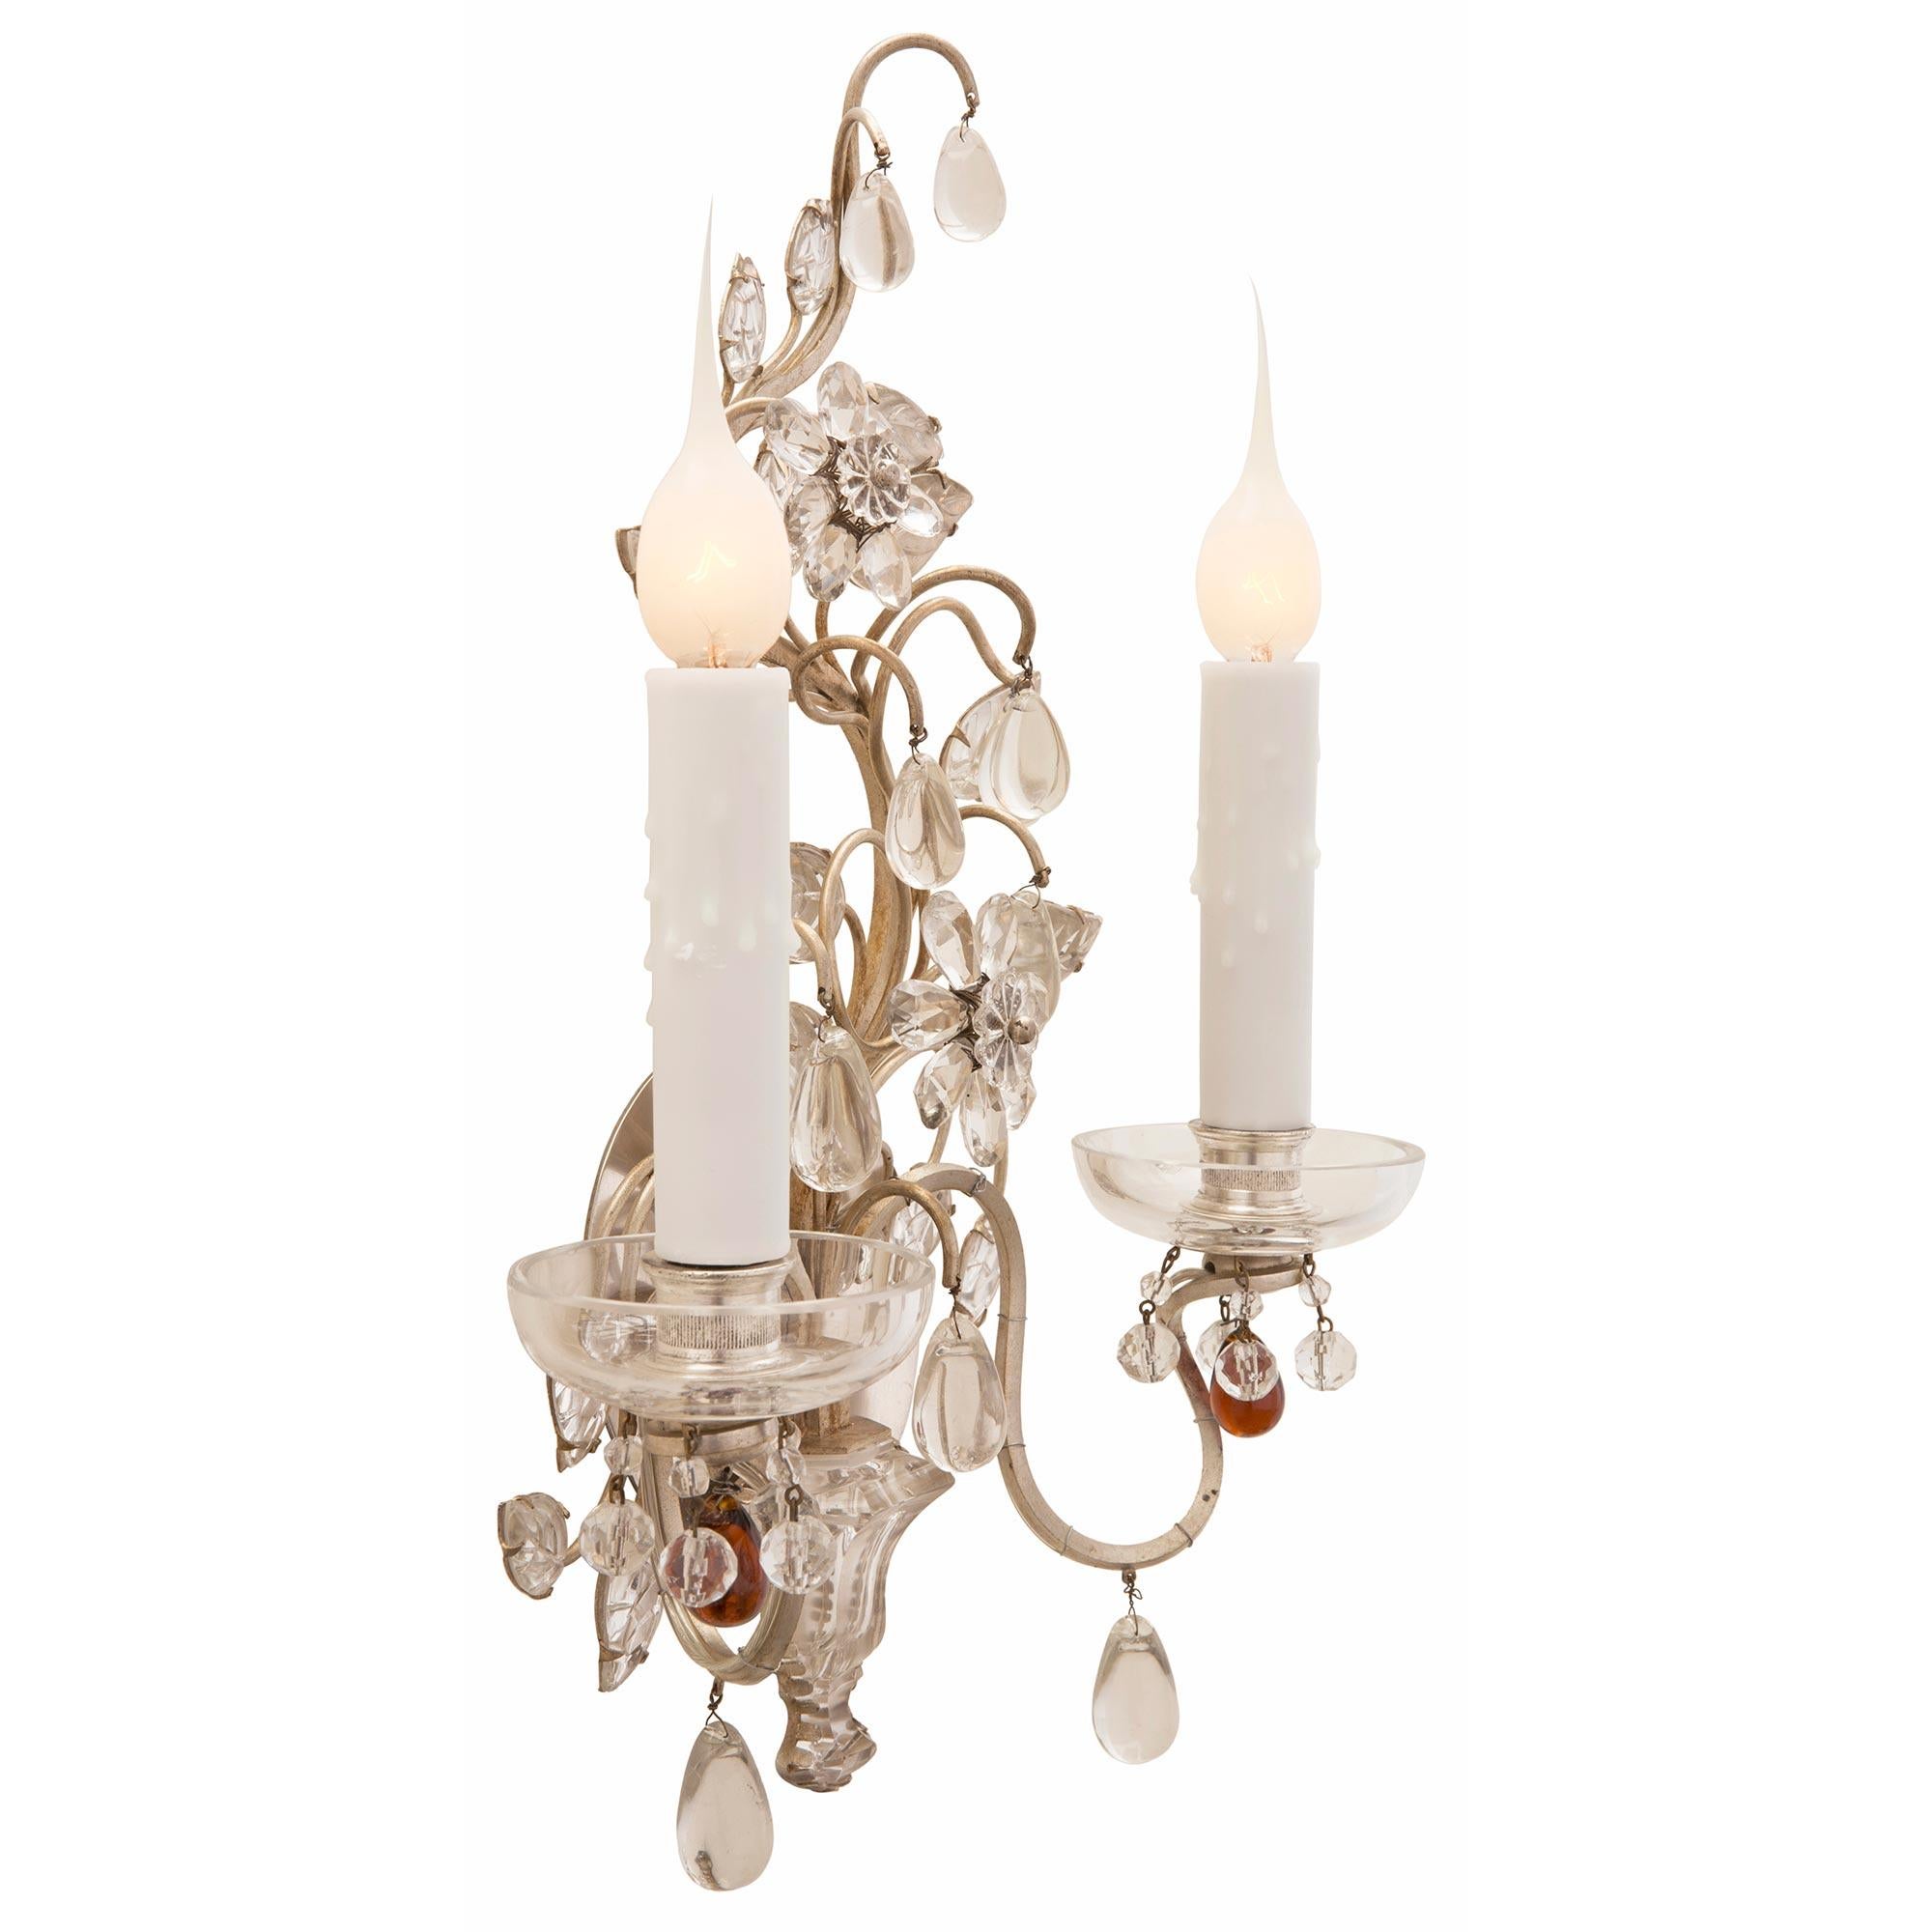 A beautiful and extremely decorative true pair of French 19th century Louis XVI st. silvered bronze, silver leaf, and crystal sconces. Each two arm sconce is centered by a most elegant urn shaped bottom crystal reserve set on a silvered leaf